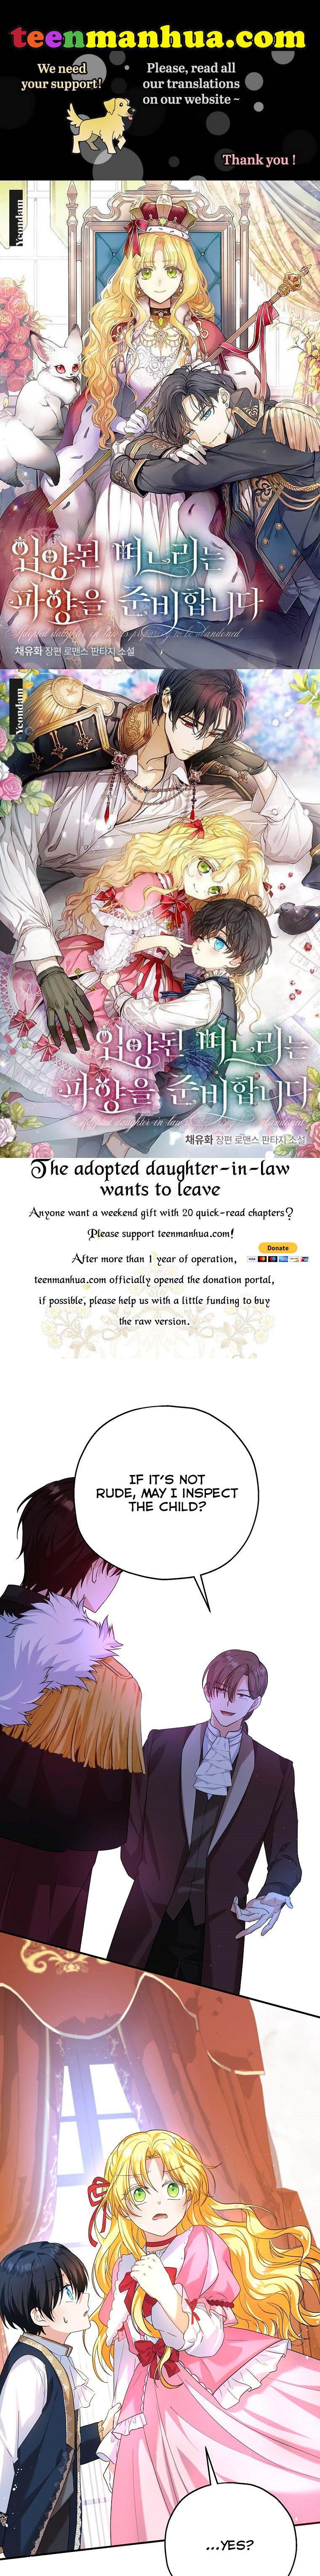 The adopted daughter-in-law wants to leave Chapter 20